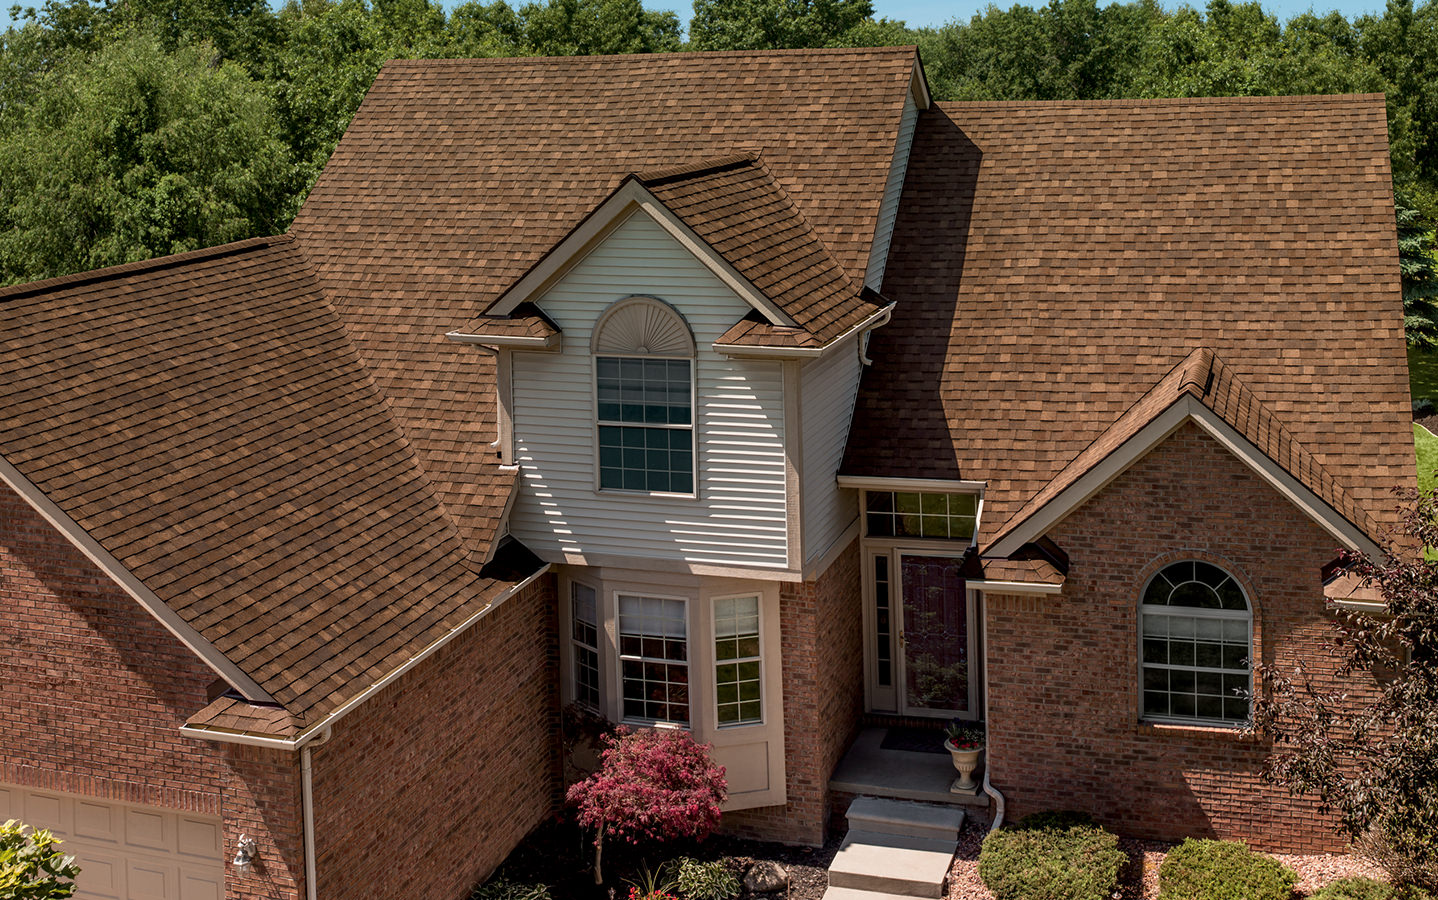 Allied Roofing Images